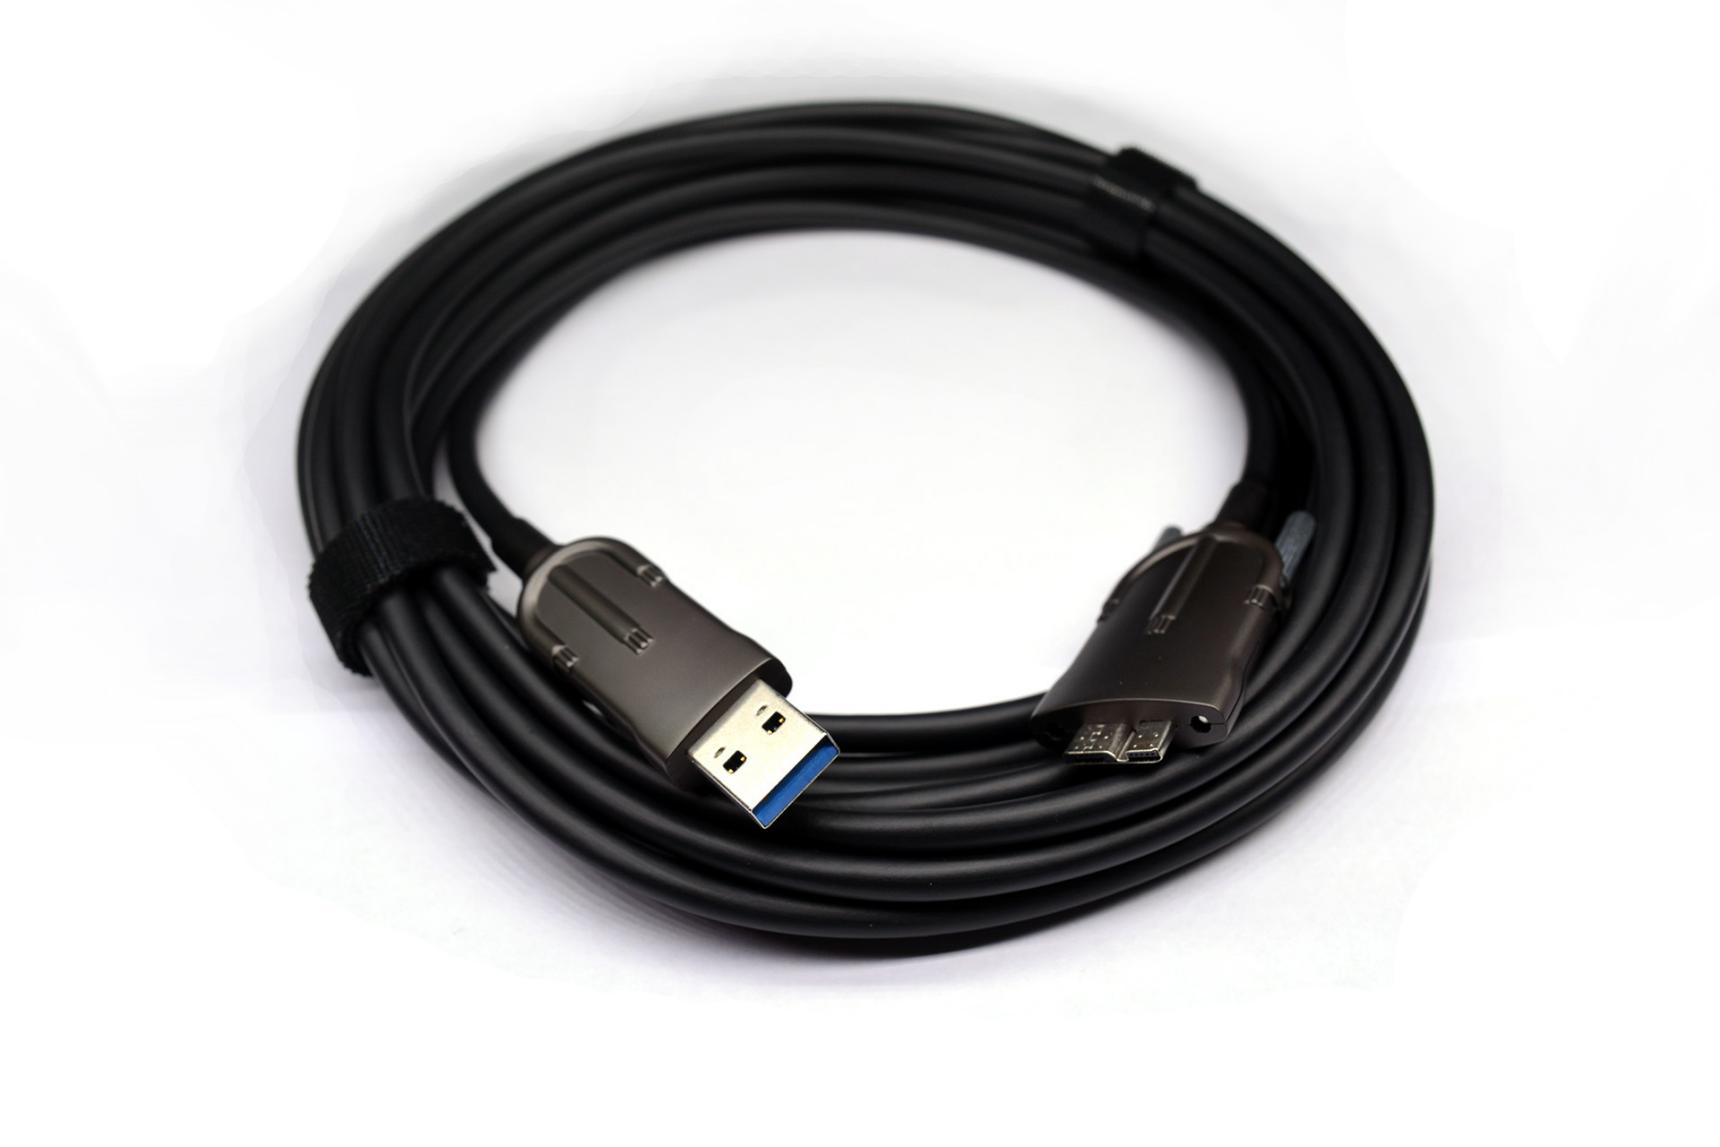 [AOC] USB 3.0 type A to micro-B with locking screws usb high flex active optical cable for industrial cameras